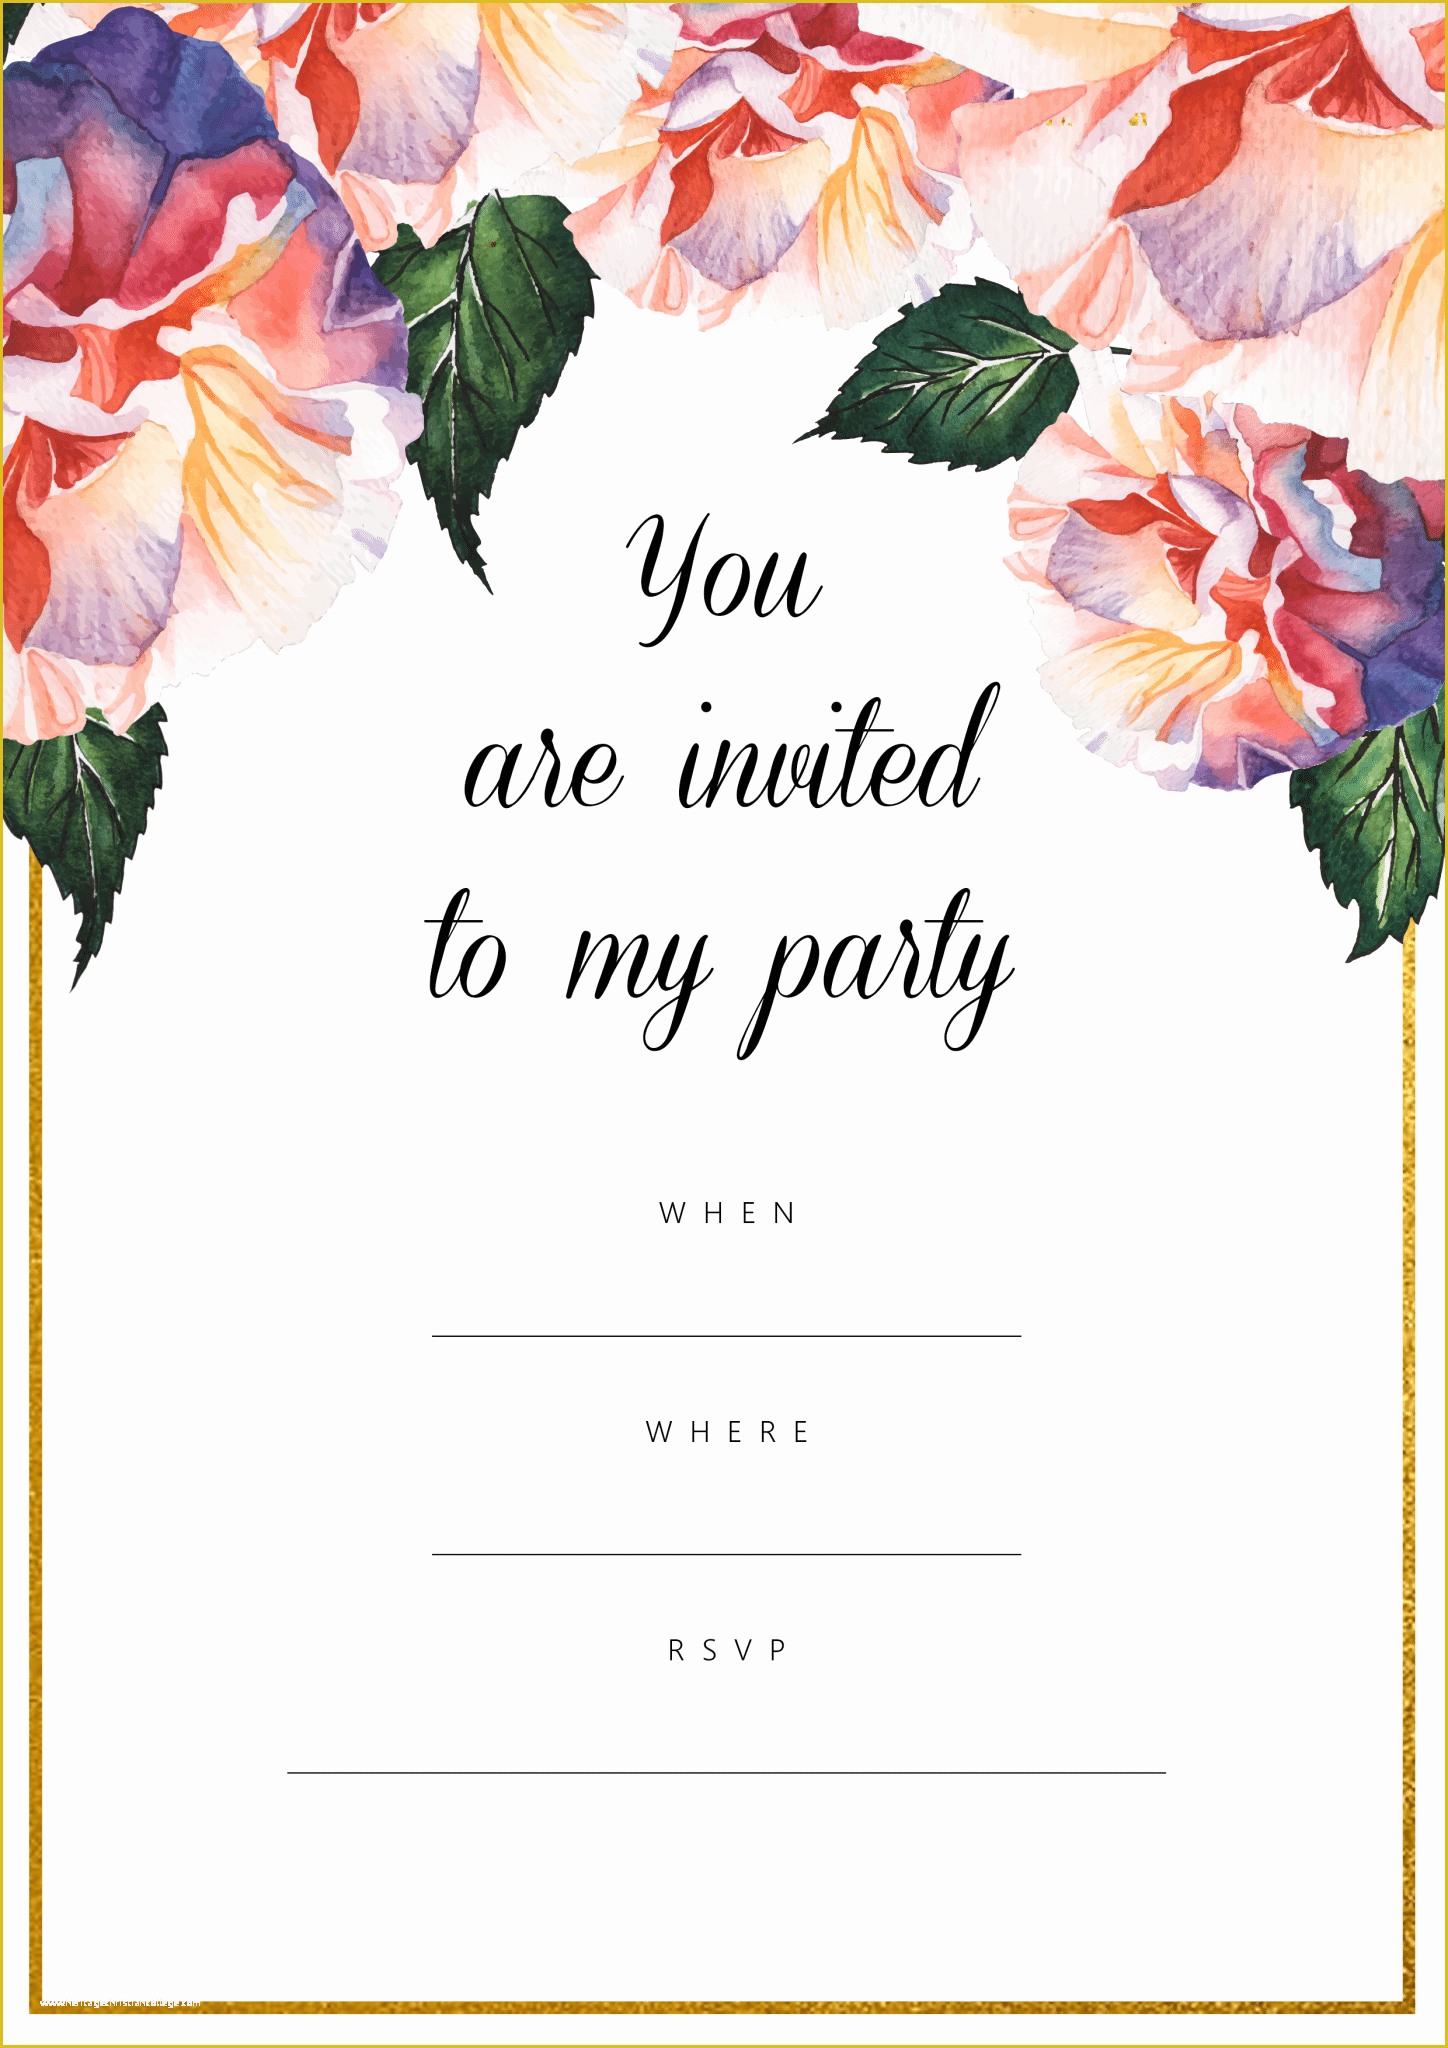 free-online-invitation-templates-of-free-party-invitations-all-free-invitations